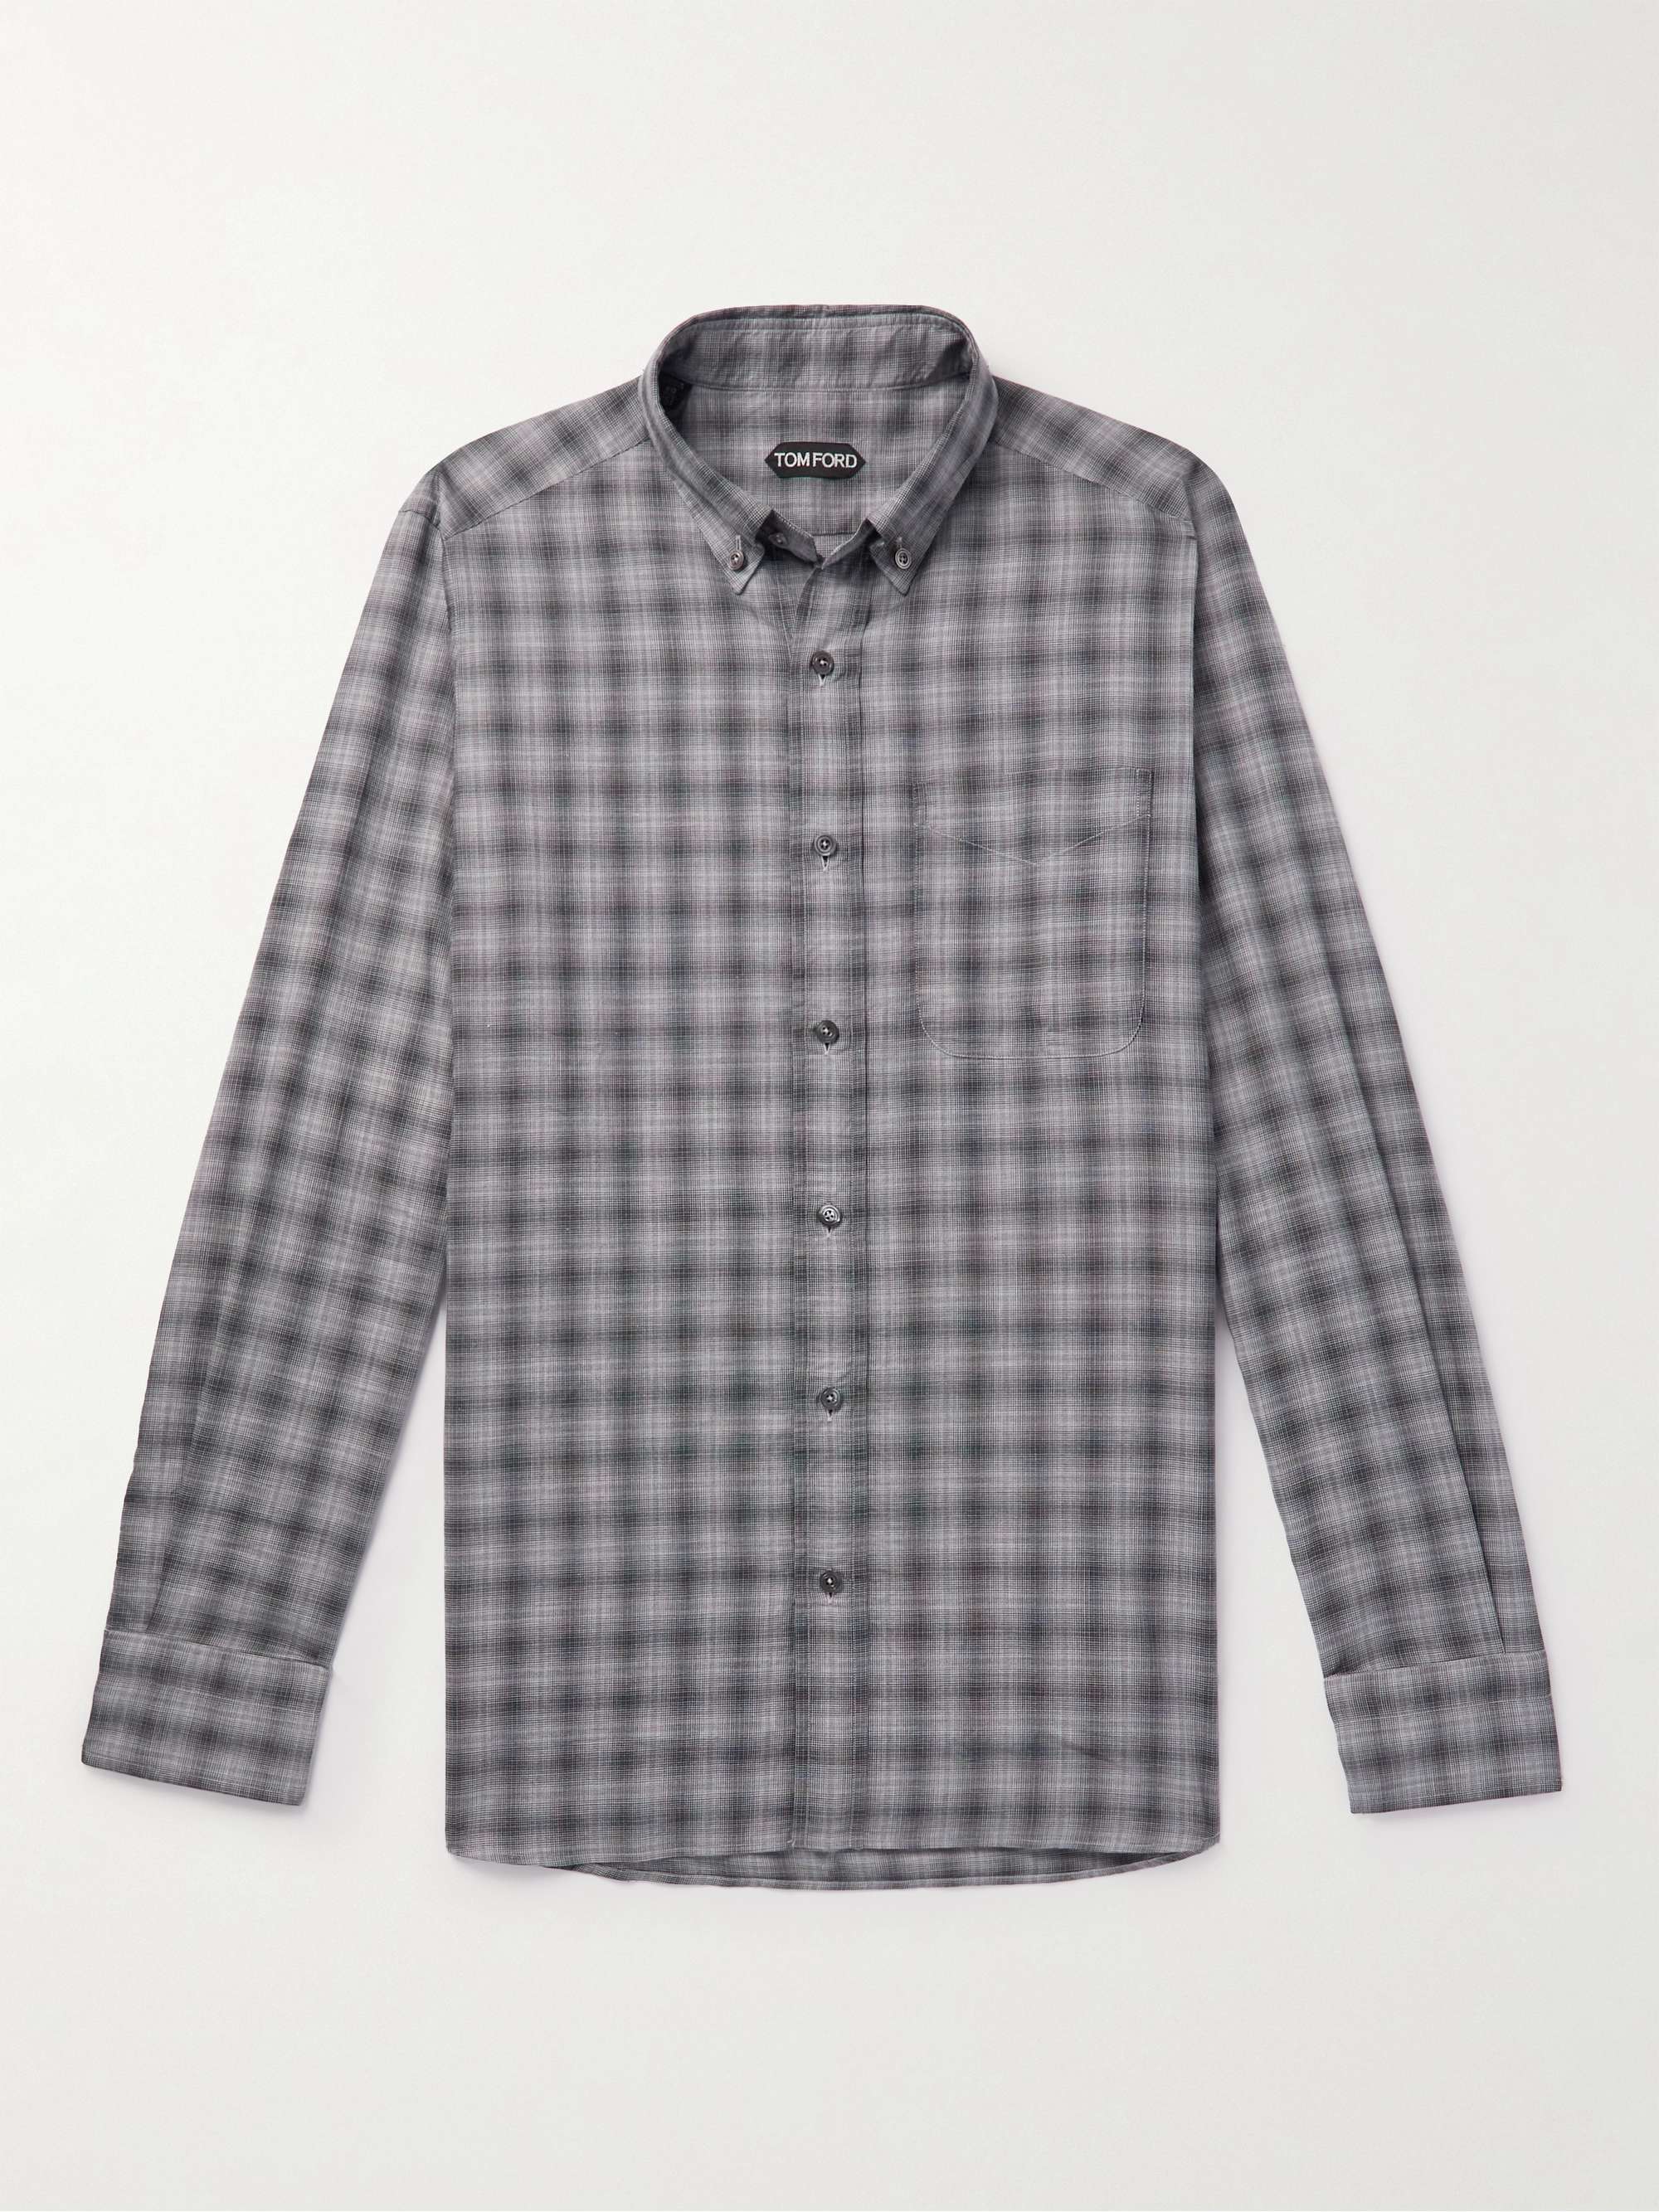 TOM FORD Checked Cotton-Flannel Shirt | MR PORTER